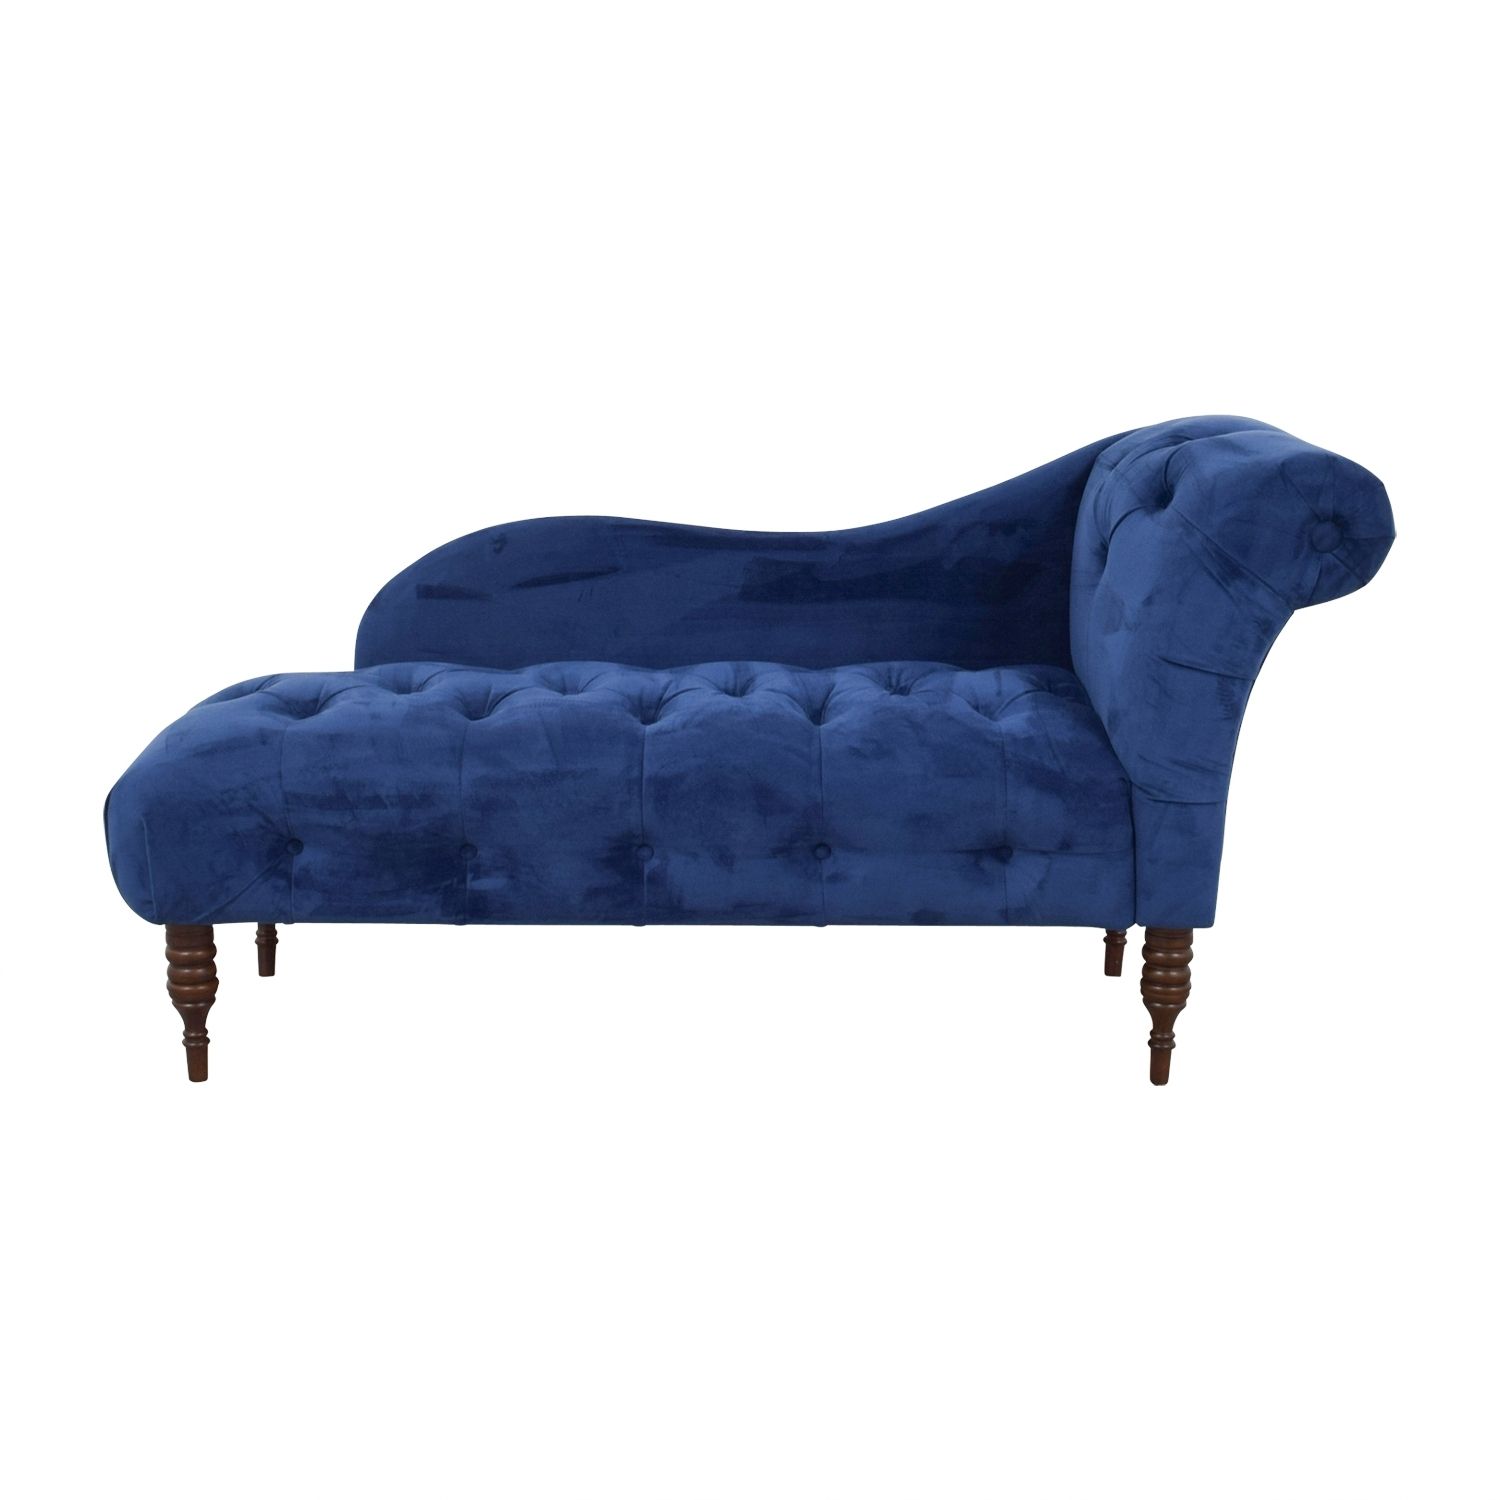 [%39% Off – One Kings Lane One Kings Lane Abbyson Francis Tufted Within Latest Blue Chaises|blue Chaises Throughout 2018 39% Off – One Kings Lane One Kings Lane Abbyson Francis Tufted|newest Blue Chaises With Regard To 39% Off – One Kings Lane One Kings Lane Abbyson Francis Tufted|well Known 39% Off – One Kings Lane One Kings Lane Abbyson Francis Tufted Within Blue Chaises%] (View 12 of 15)